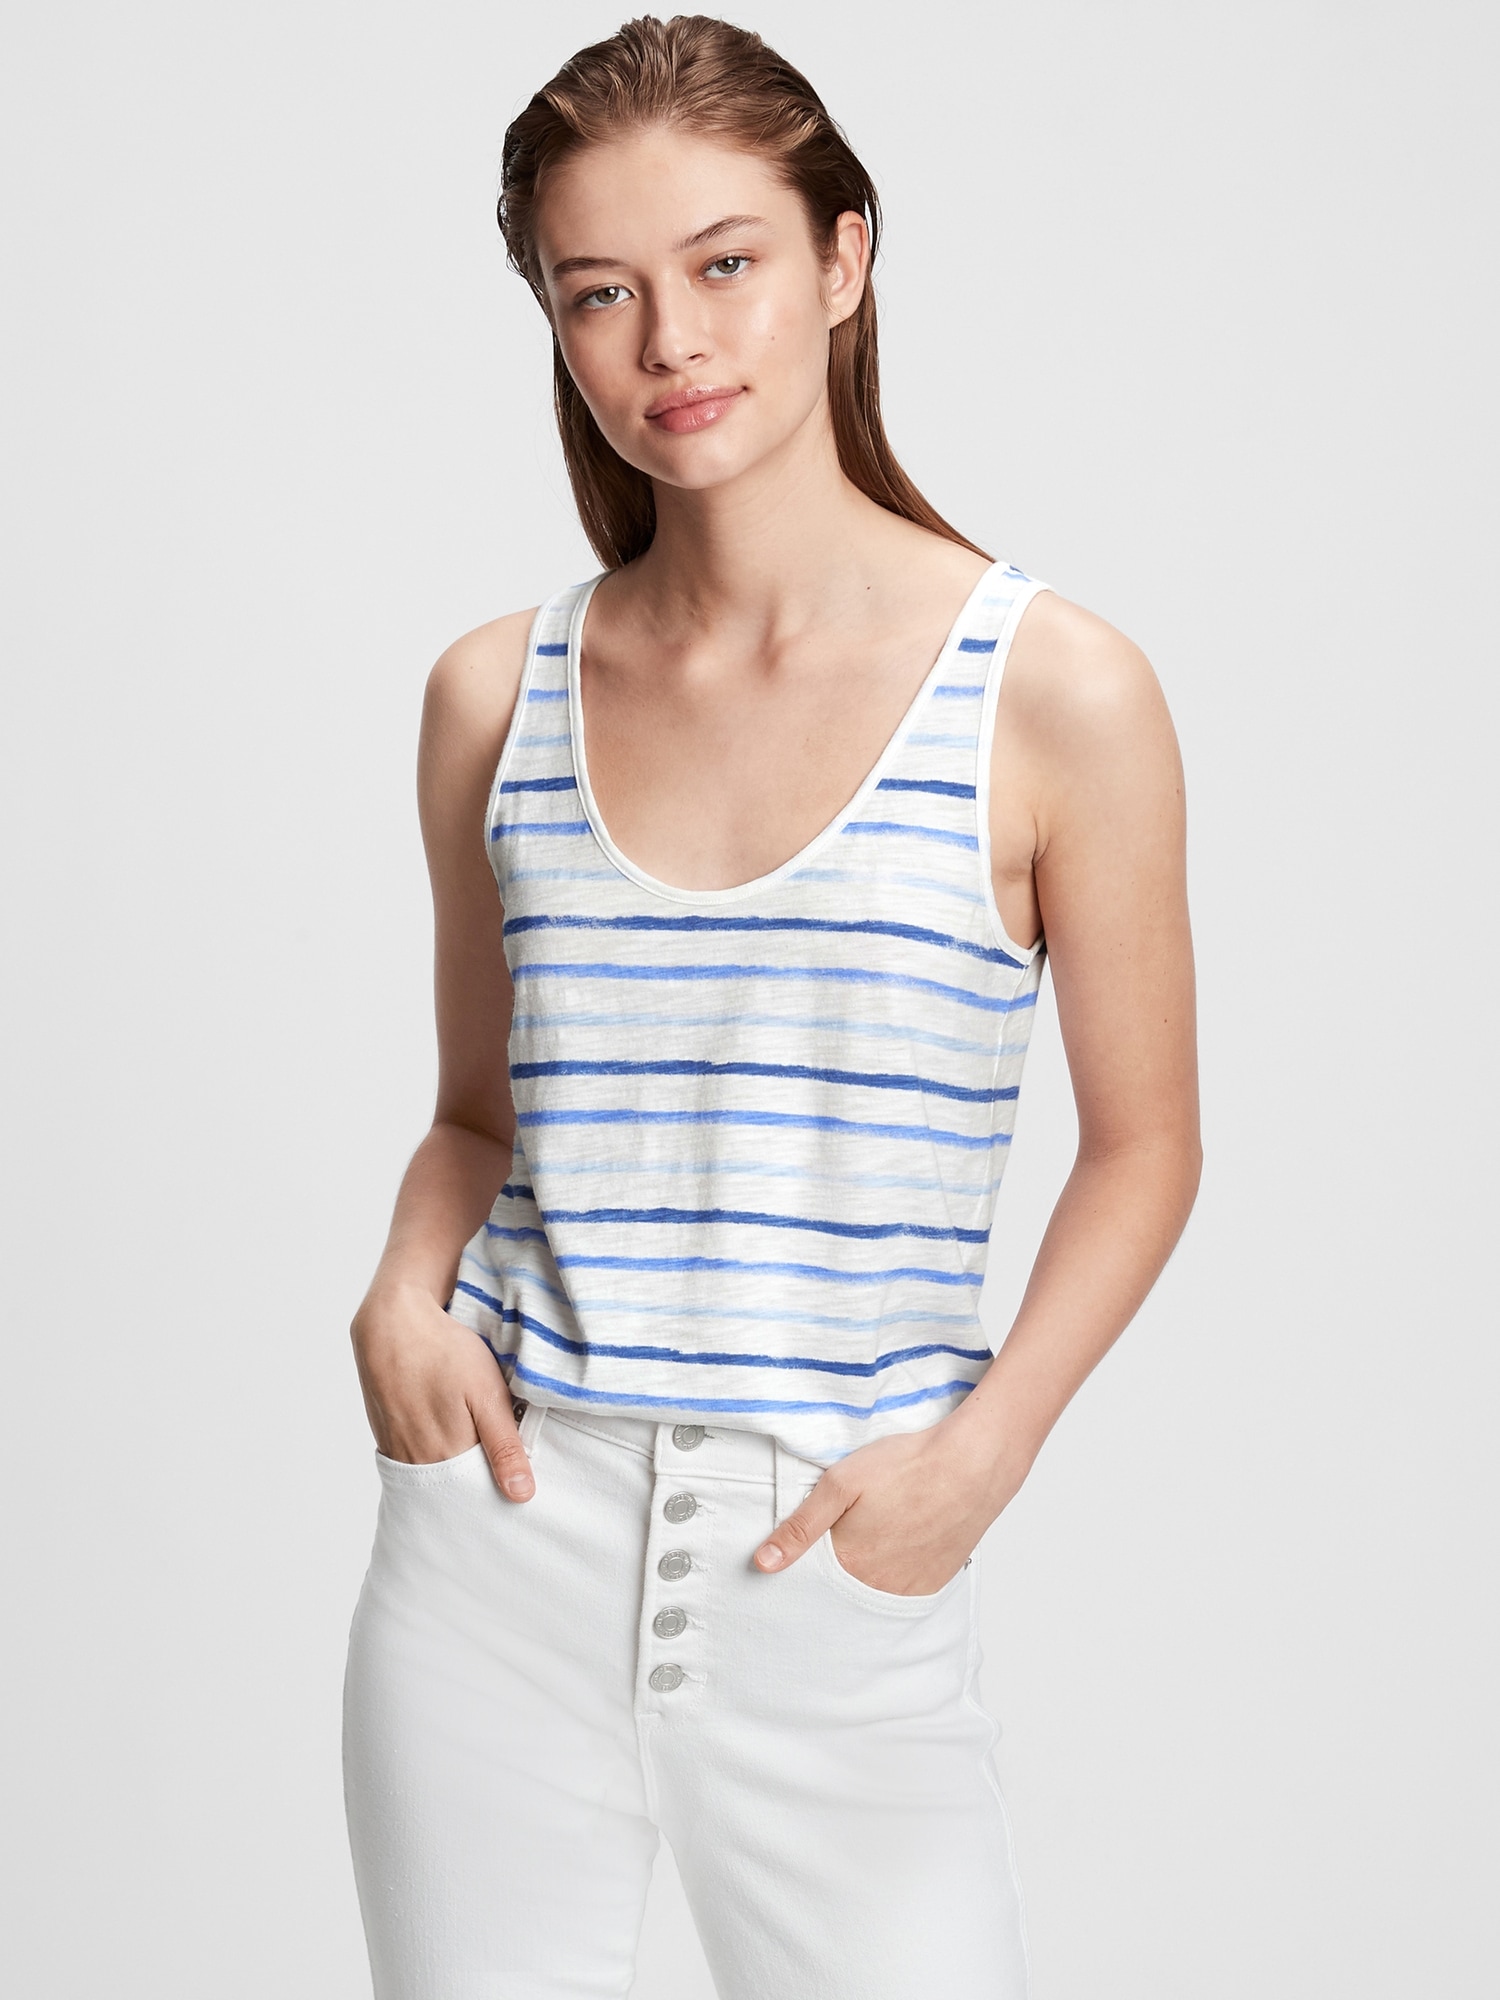 ForeverSoft Scoopneck Tank Top | Gap Factory